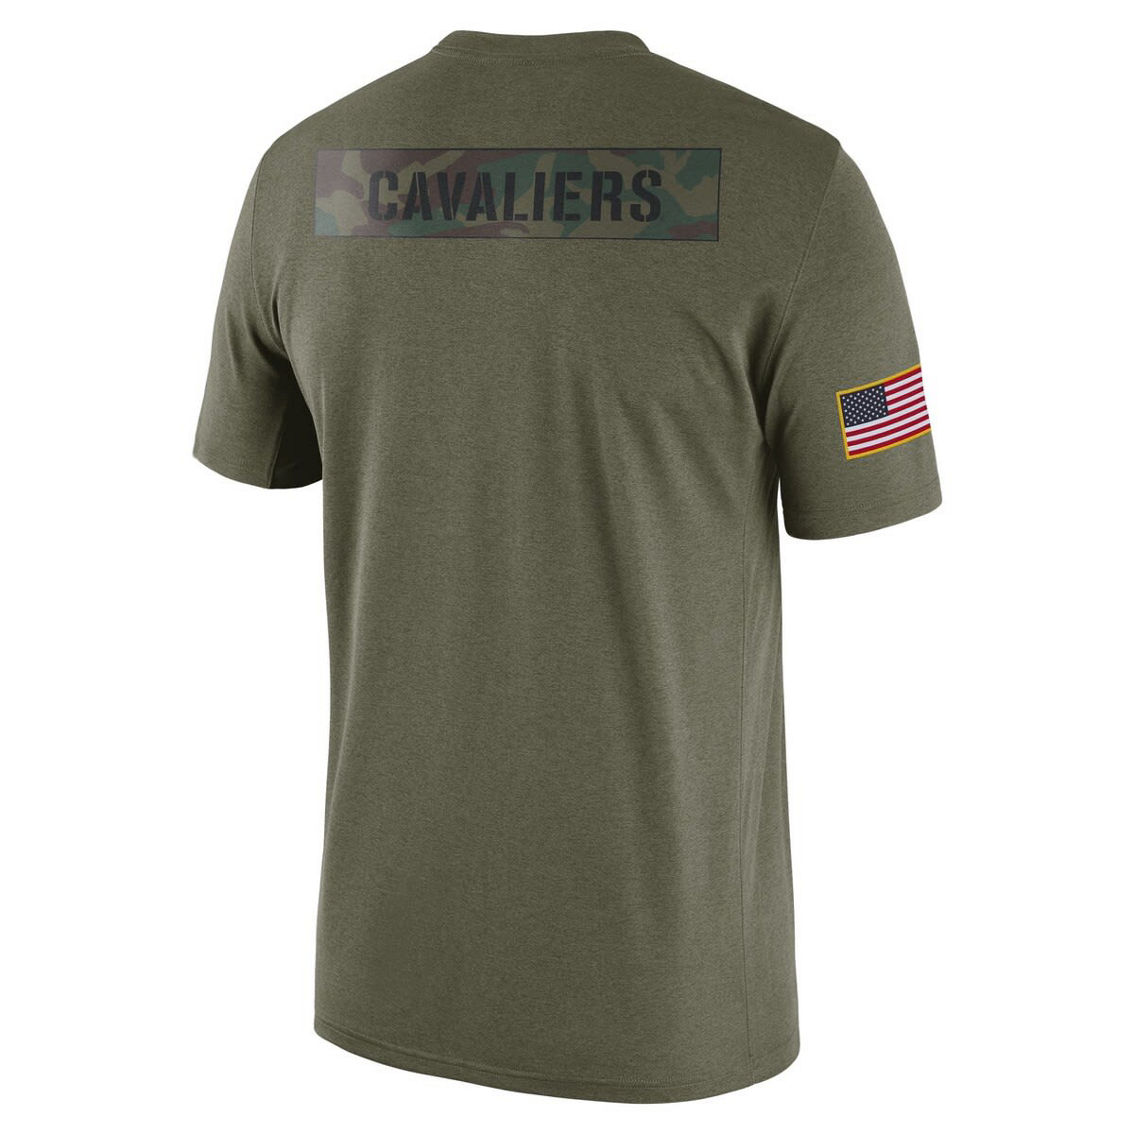 Nike Men's Olive Virginia Cavaliers Military Pack T-Shirt - Image 4 of 4